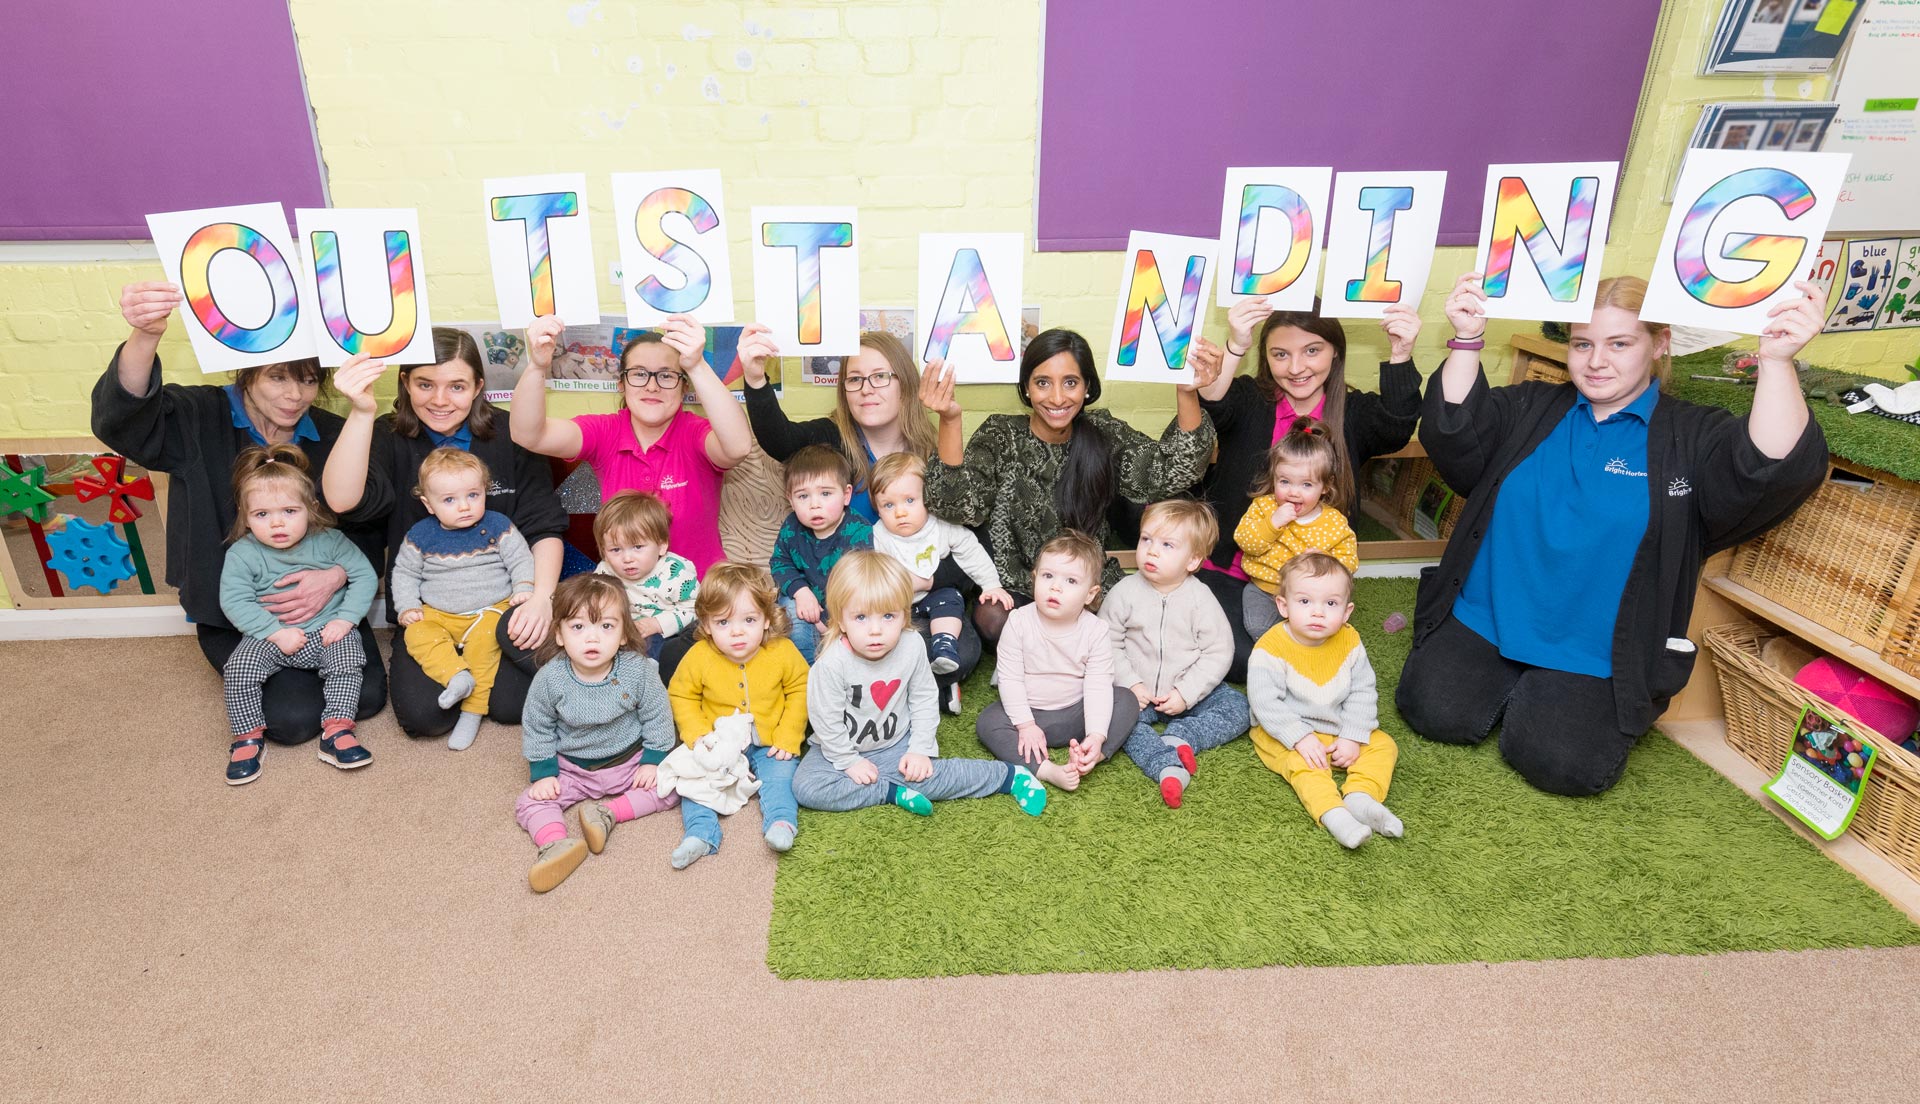 Beacon Road Day Nursery and Preschool are delighted to have been rated Outstanding by Ofsted